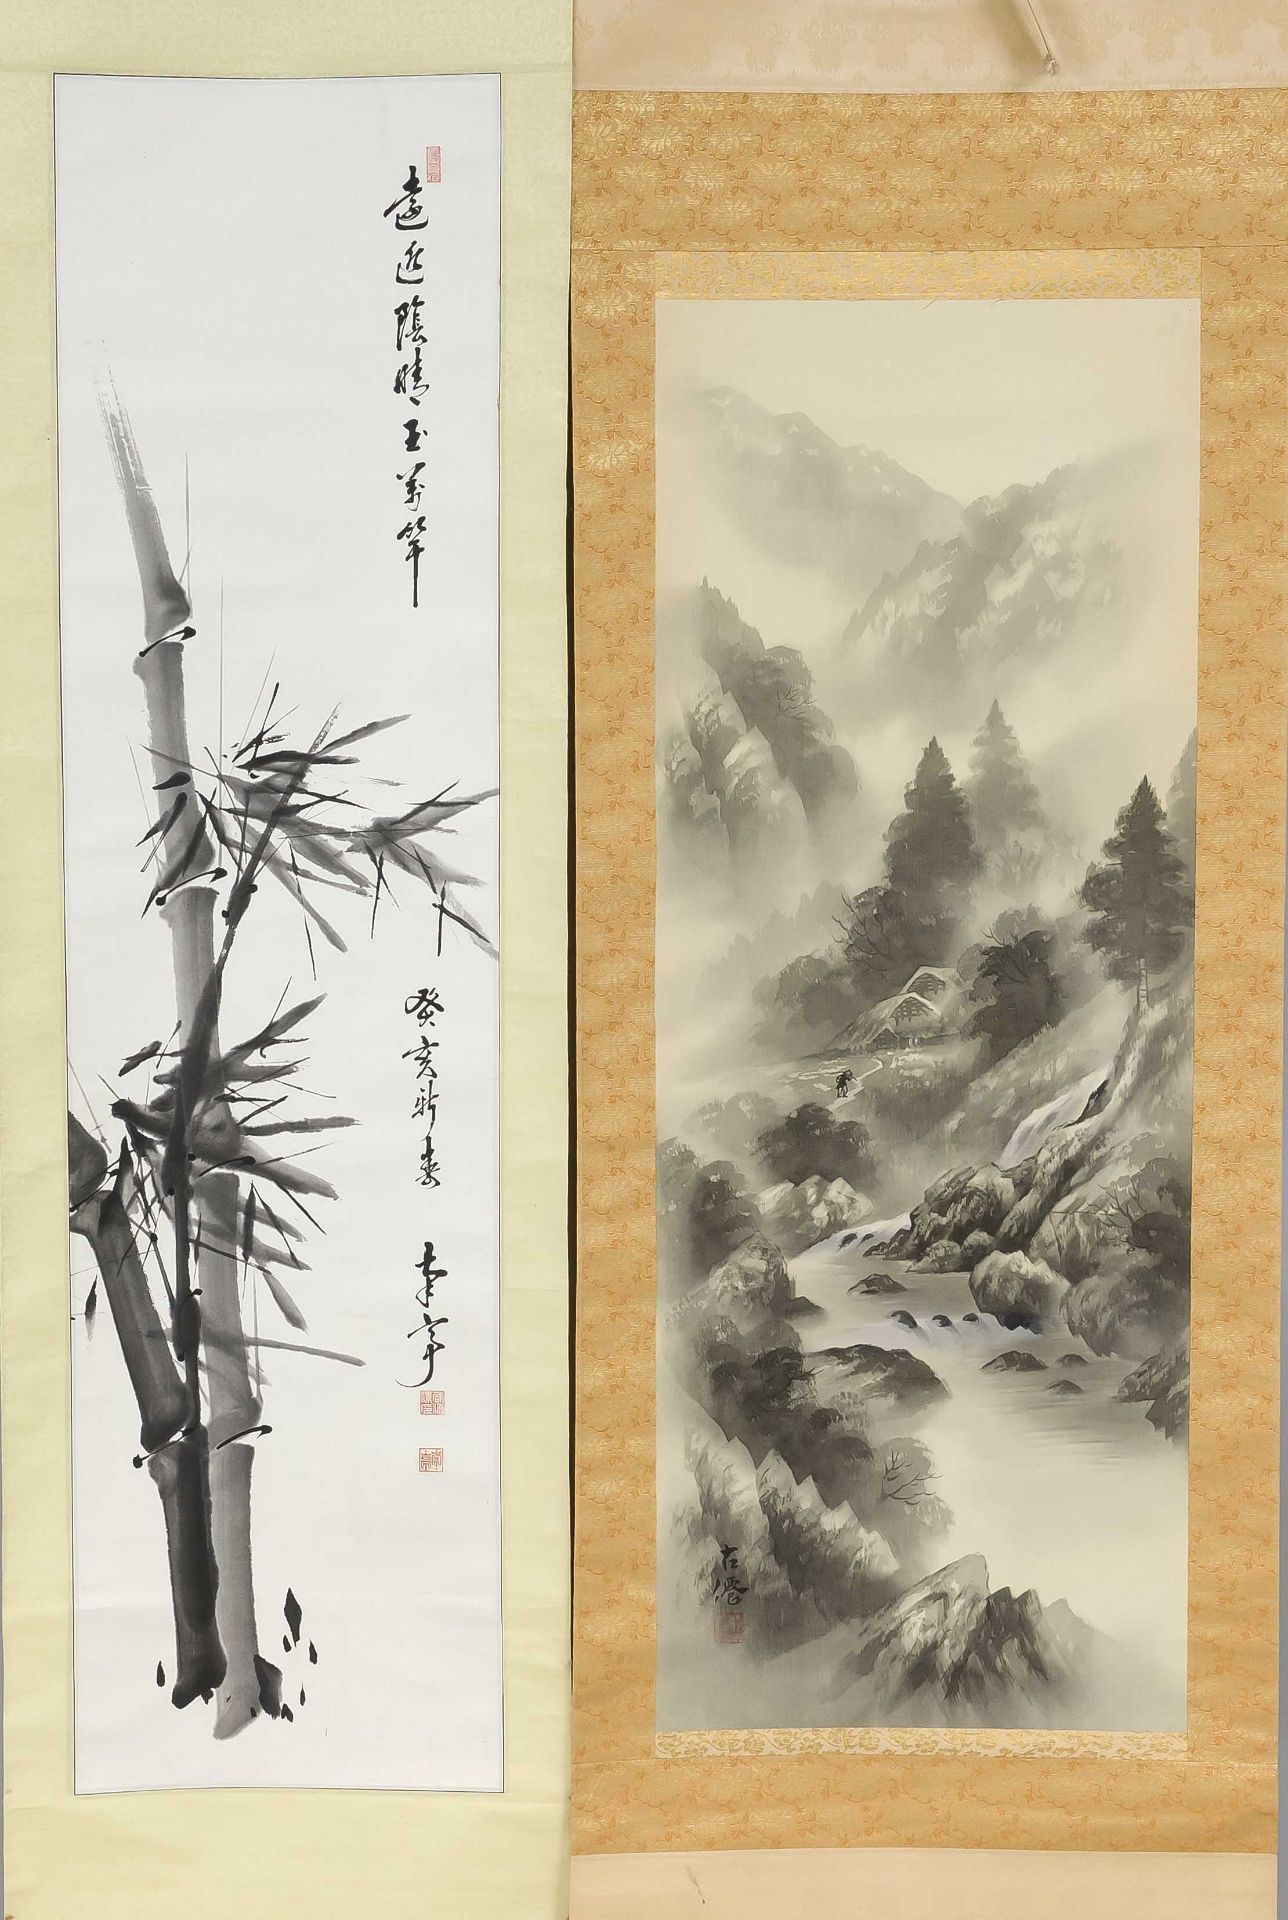 2 ink paintings, China 20th century, on silk. 1 x bamboo, 1 x rocky river landscape. Both signed/